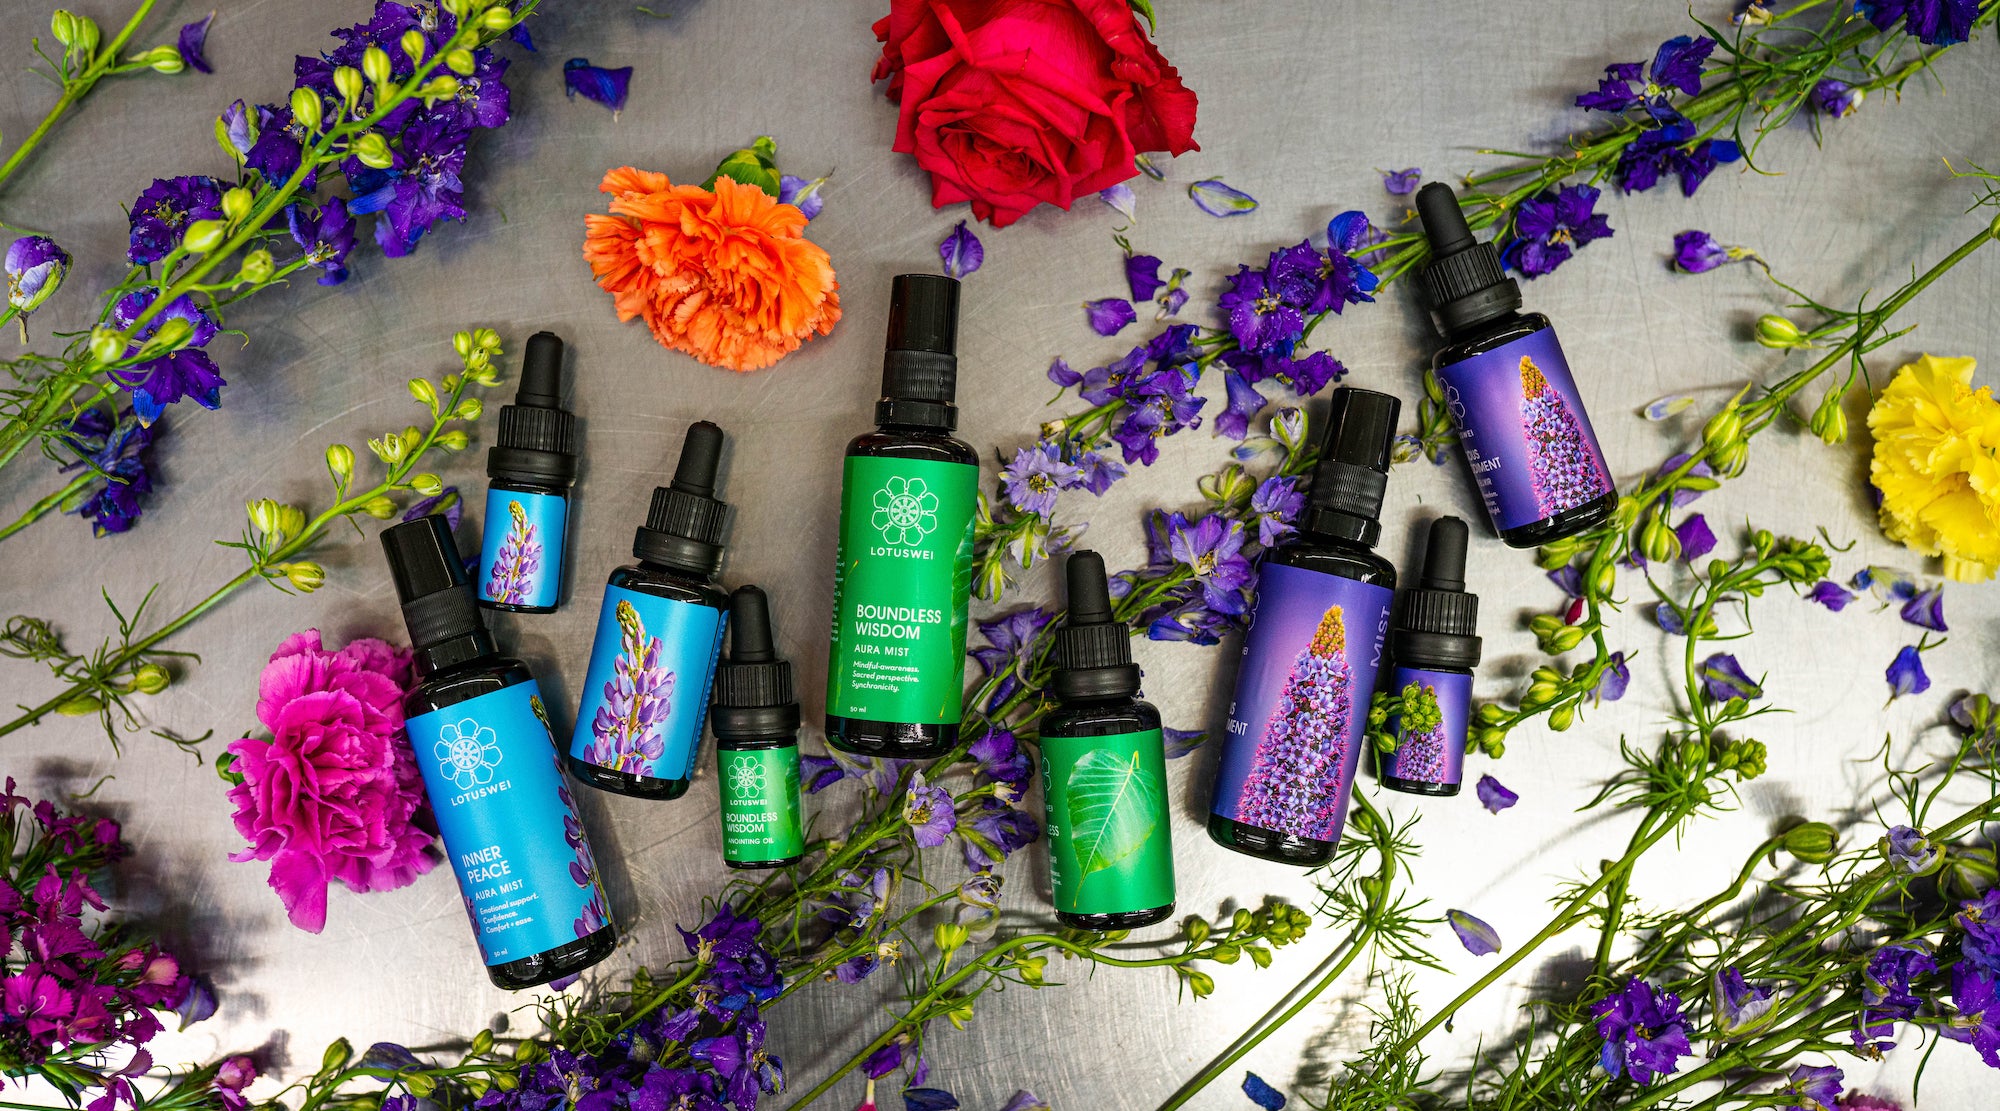 HOW TO WORK WITH FLOWER ESSENCE *VERTICALS*